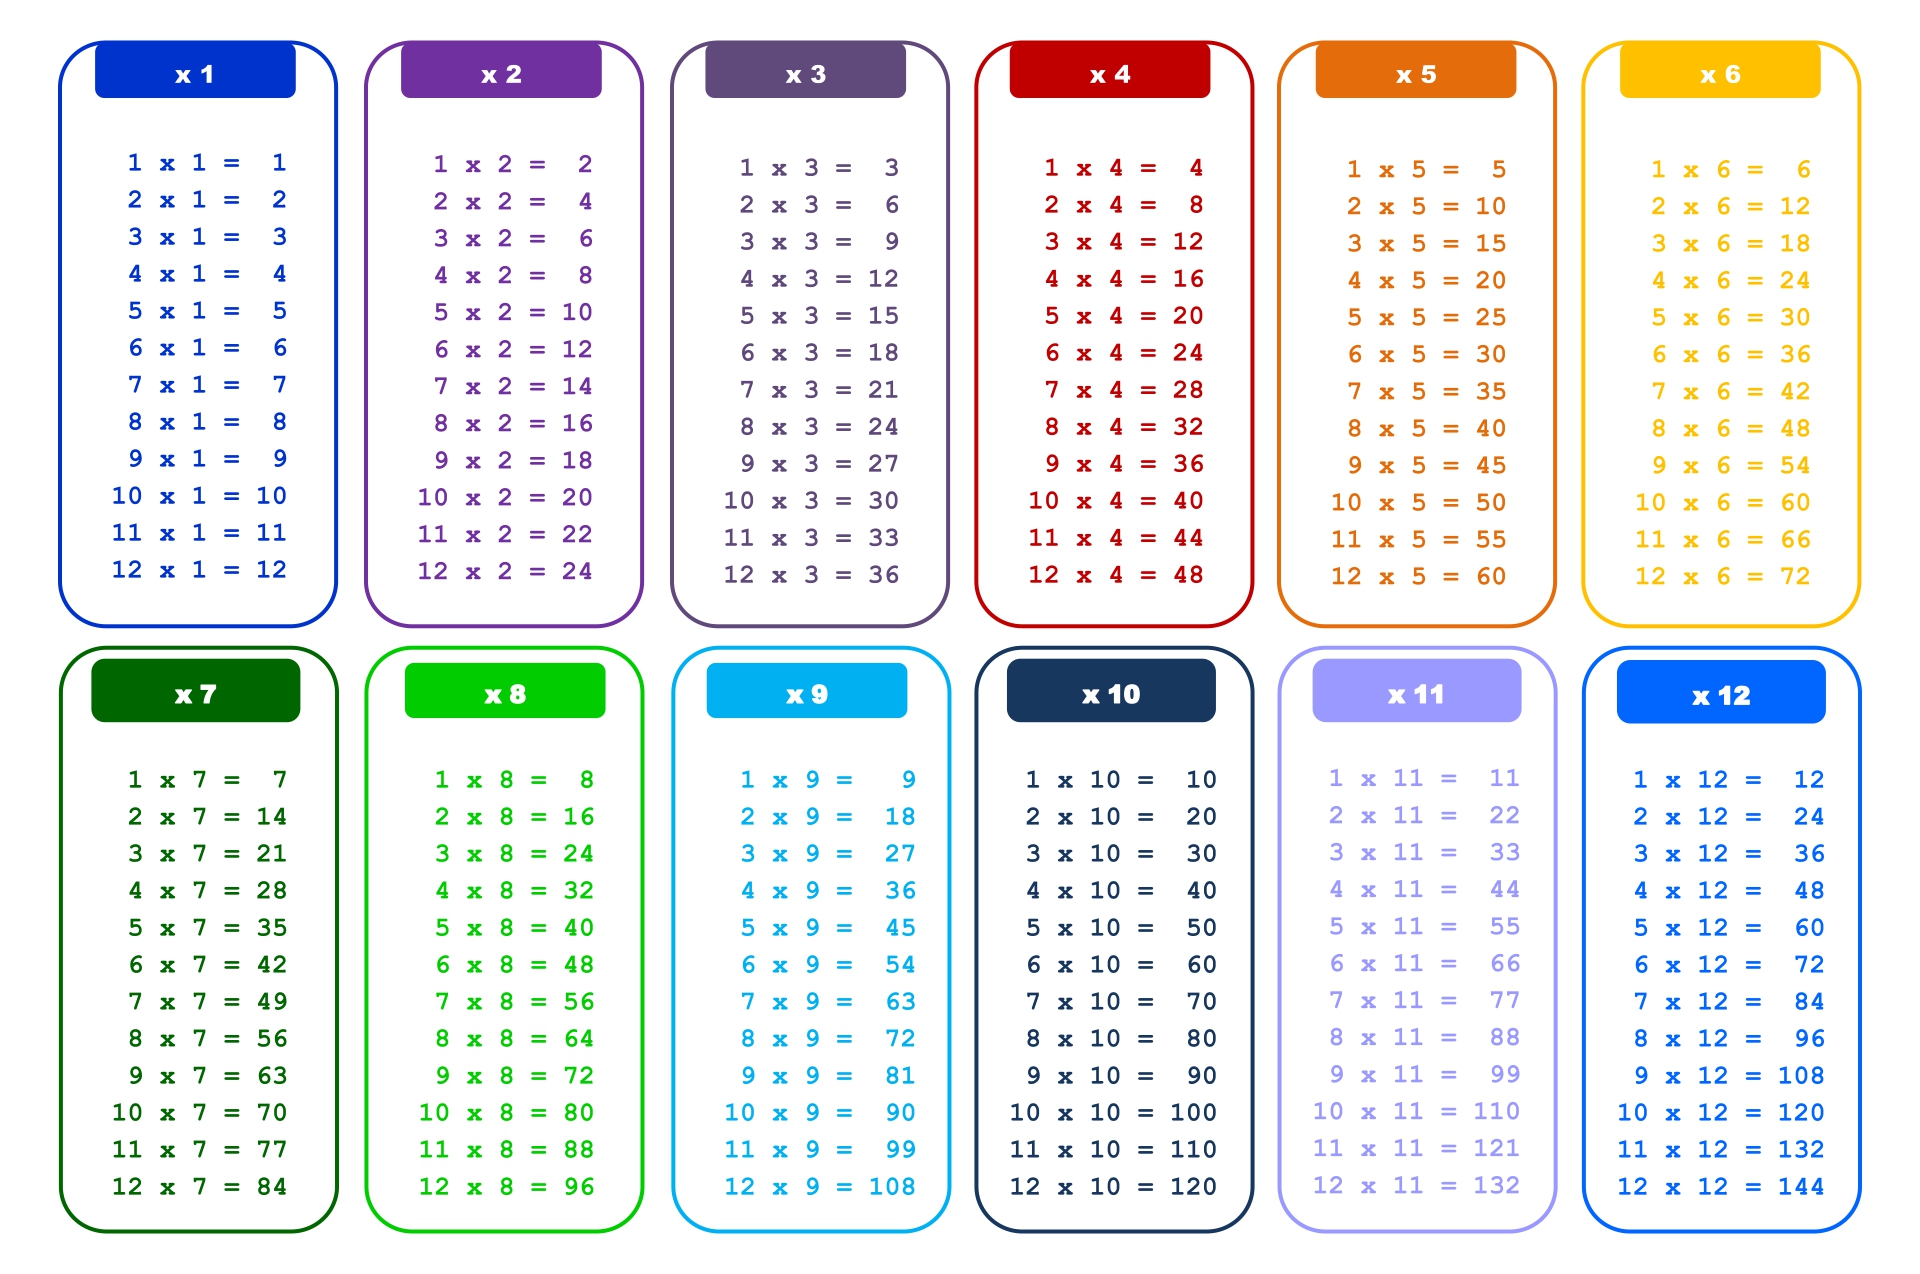 multiplication-chart-printable-pdf-1-12-get-your-hands-on-amazing